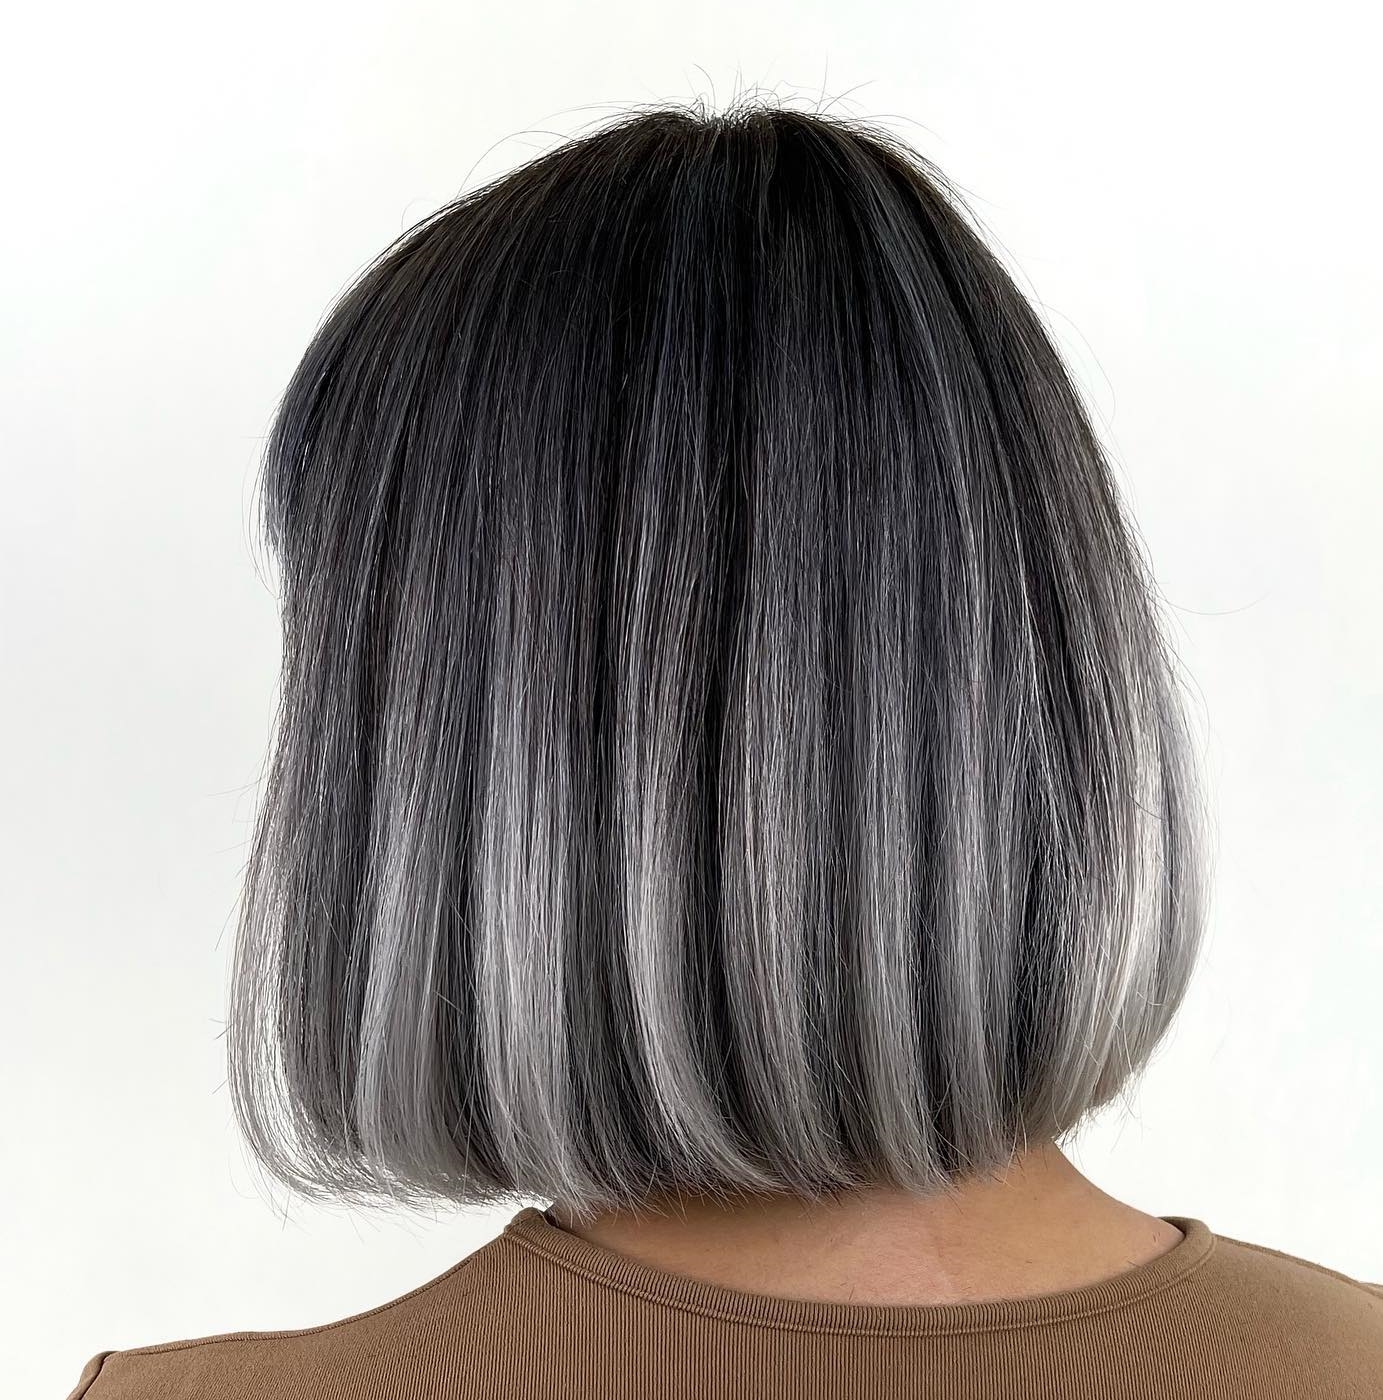 Short Bob Cut with Dark-to-Light Ombre Hair Color